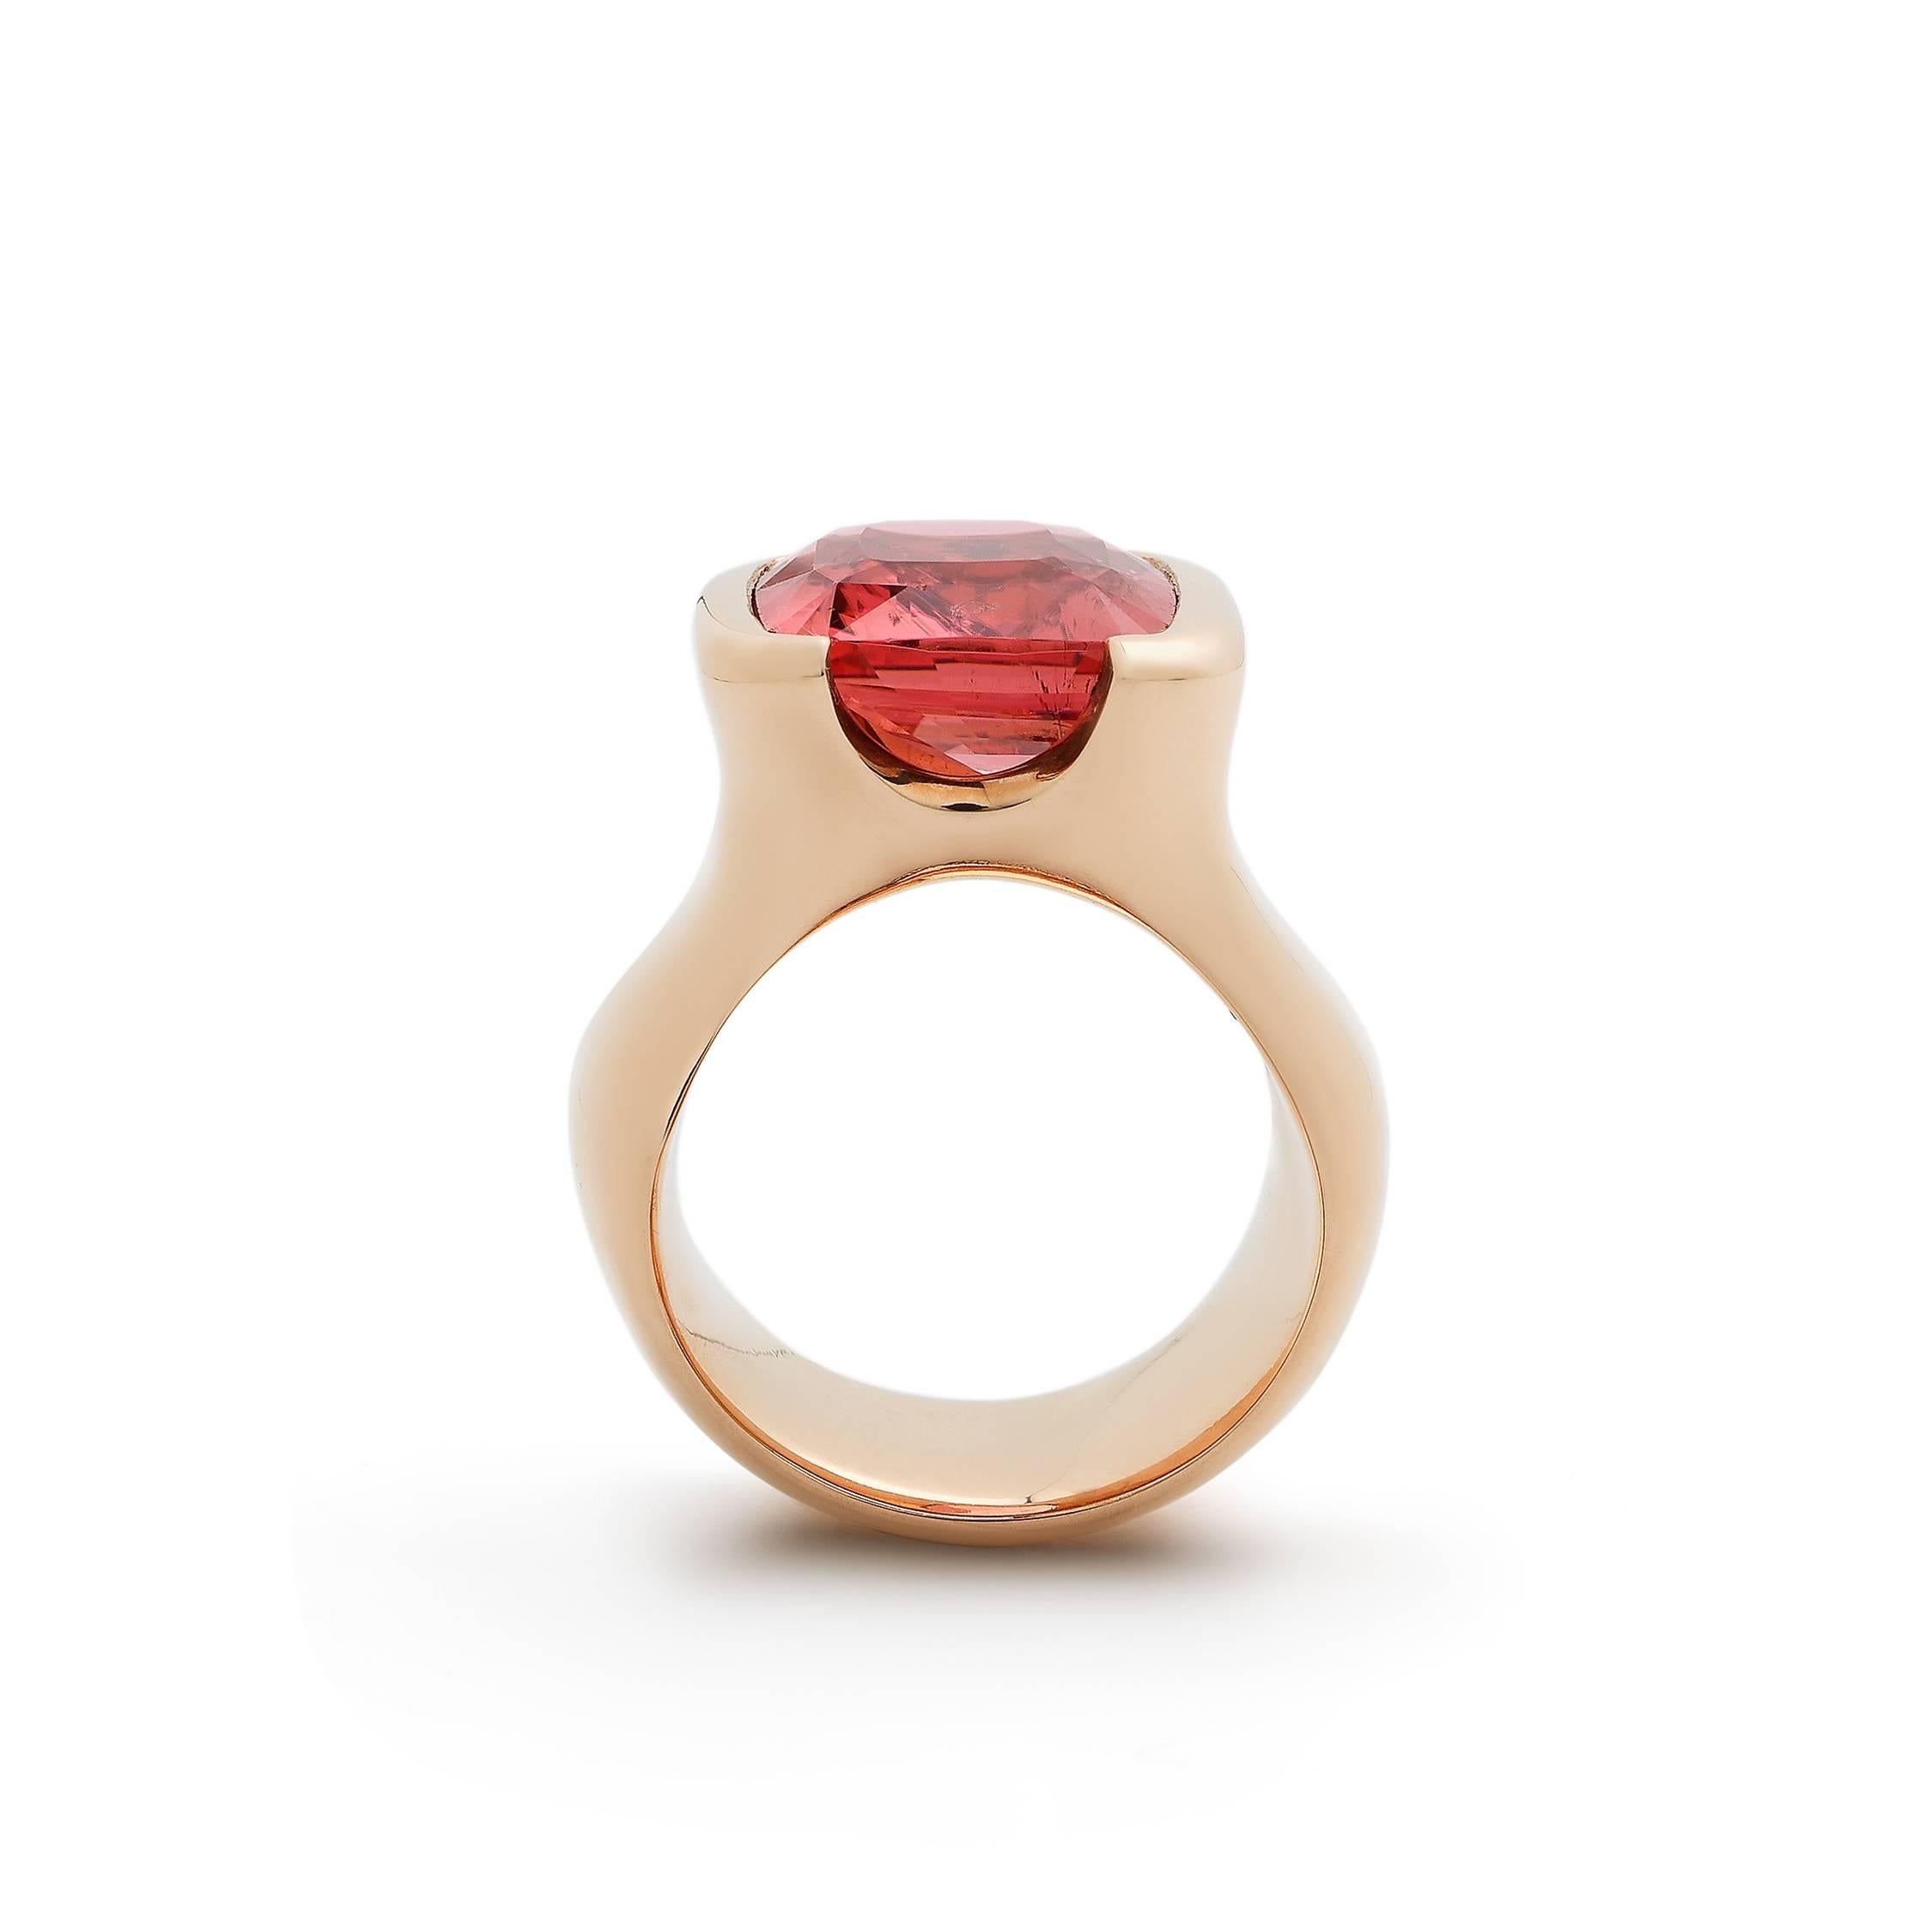 18 K rose gold ring set wit a 9,90 ct deep pink tourmaline.
The stone is 14.6 mm (length) x 16.3 mm (width, includes the gold rim). The height of the stone and setting is 9.9 mm.
The widest part of the shank is 16.5 mm and at the base the shank